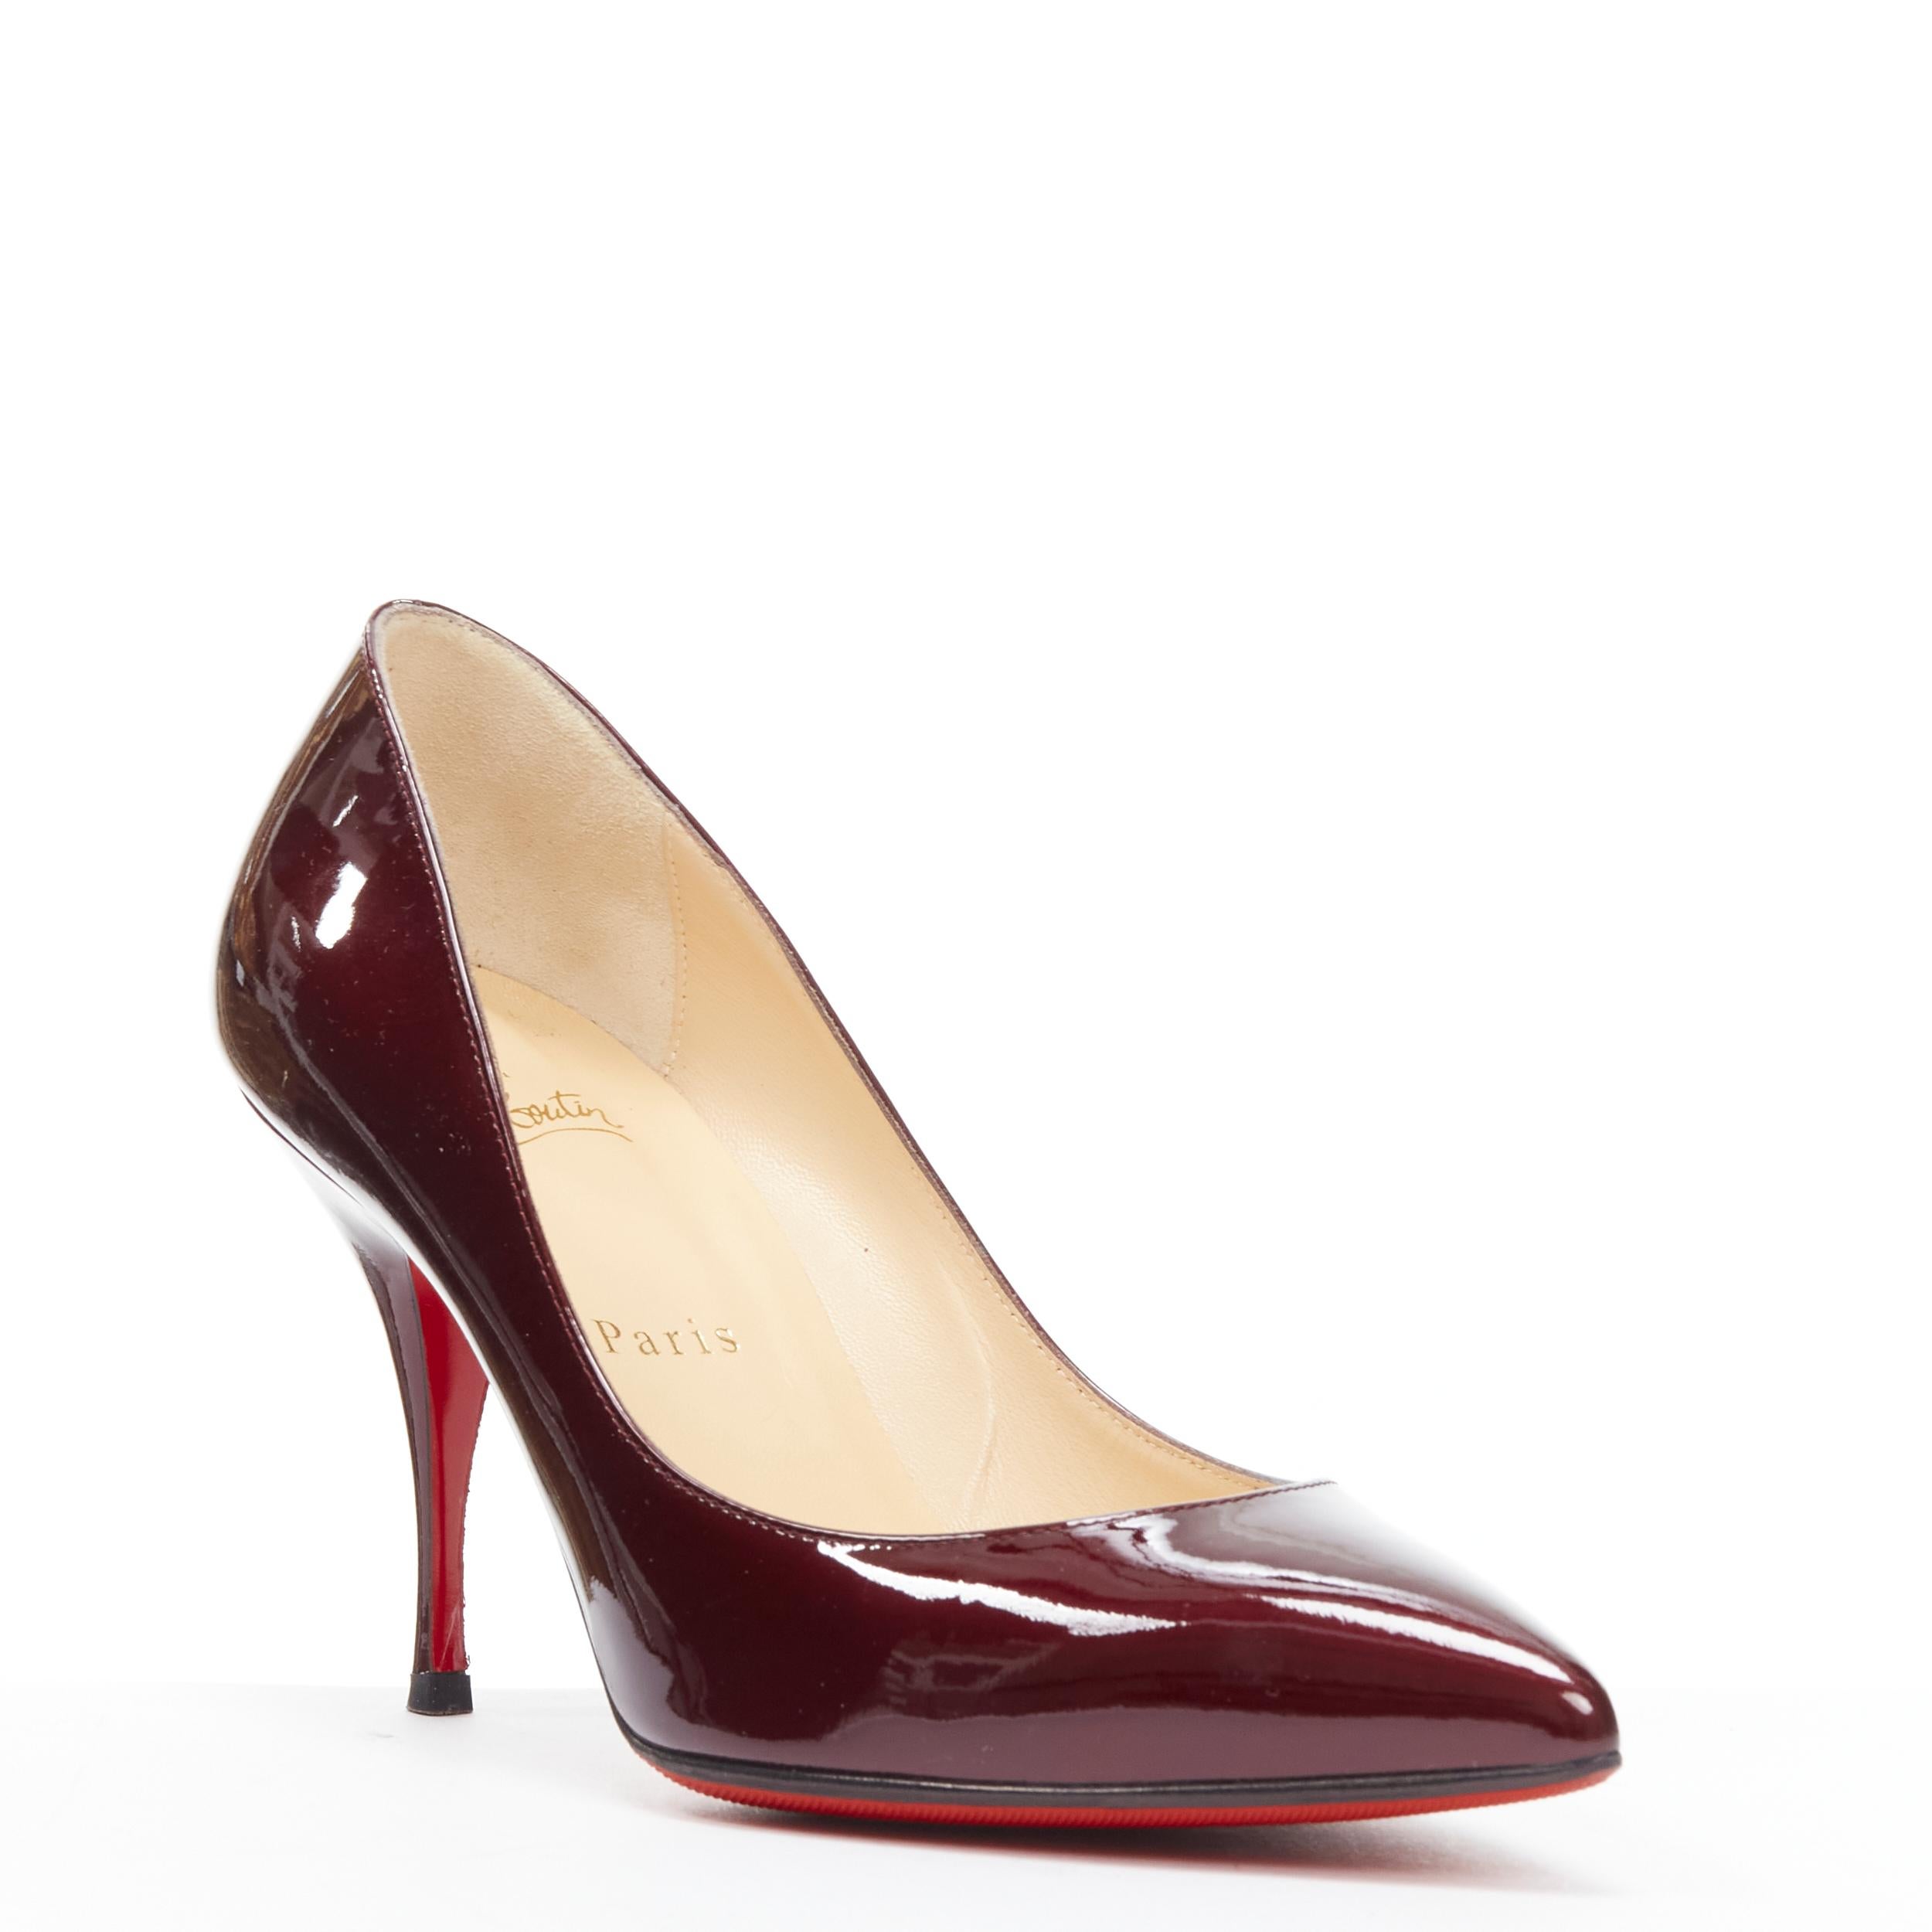 CHRISTIAN LOUBOUTIN burgundy red patent leather 85mm pigalle pumps EU37 
Reference: TACW/A00017
Brand: Christian Louboutin 
Designer: Christian Louboutin 
Material: Patent Leather 
Color: Burgundy 
Pattern: Solid Extra 
Detail: Slim heel. 
Estimated